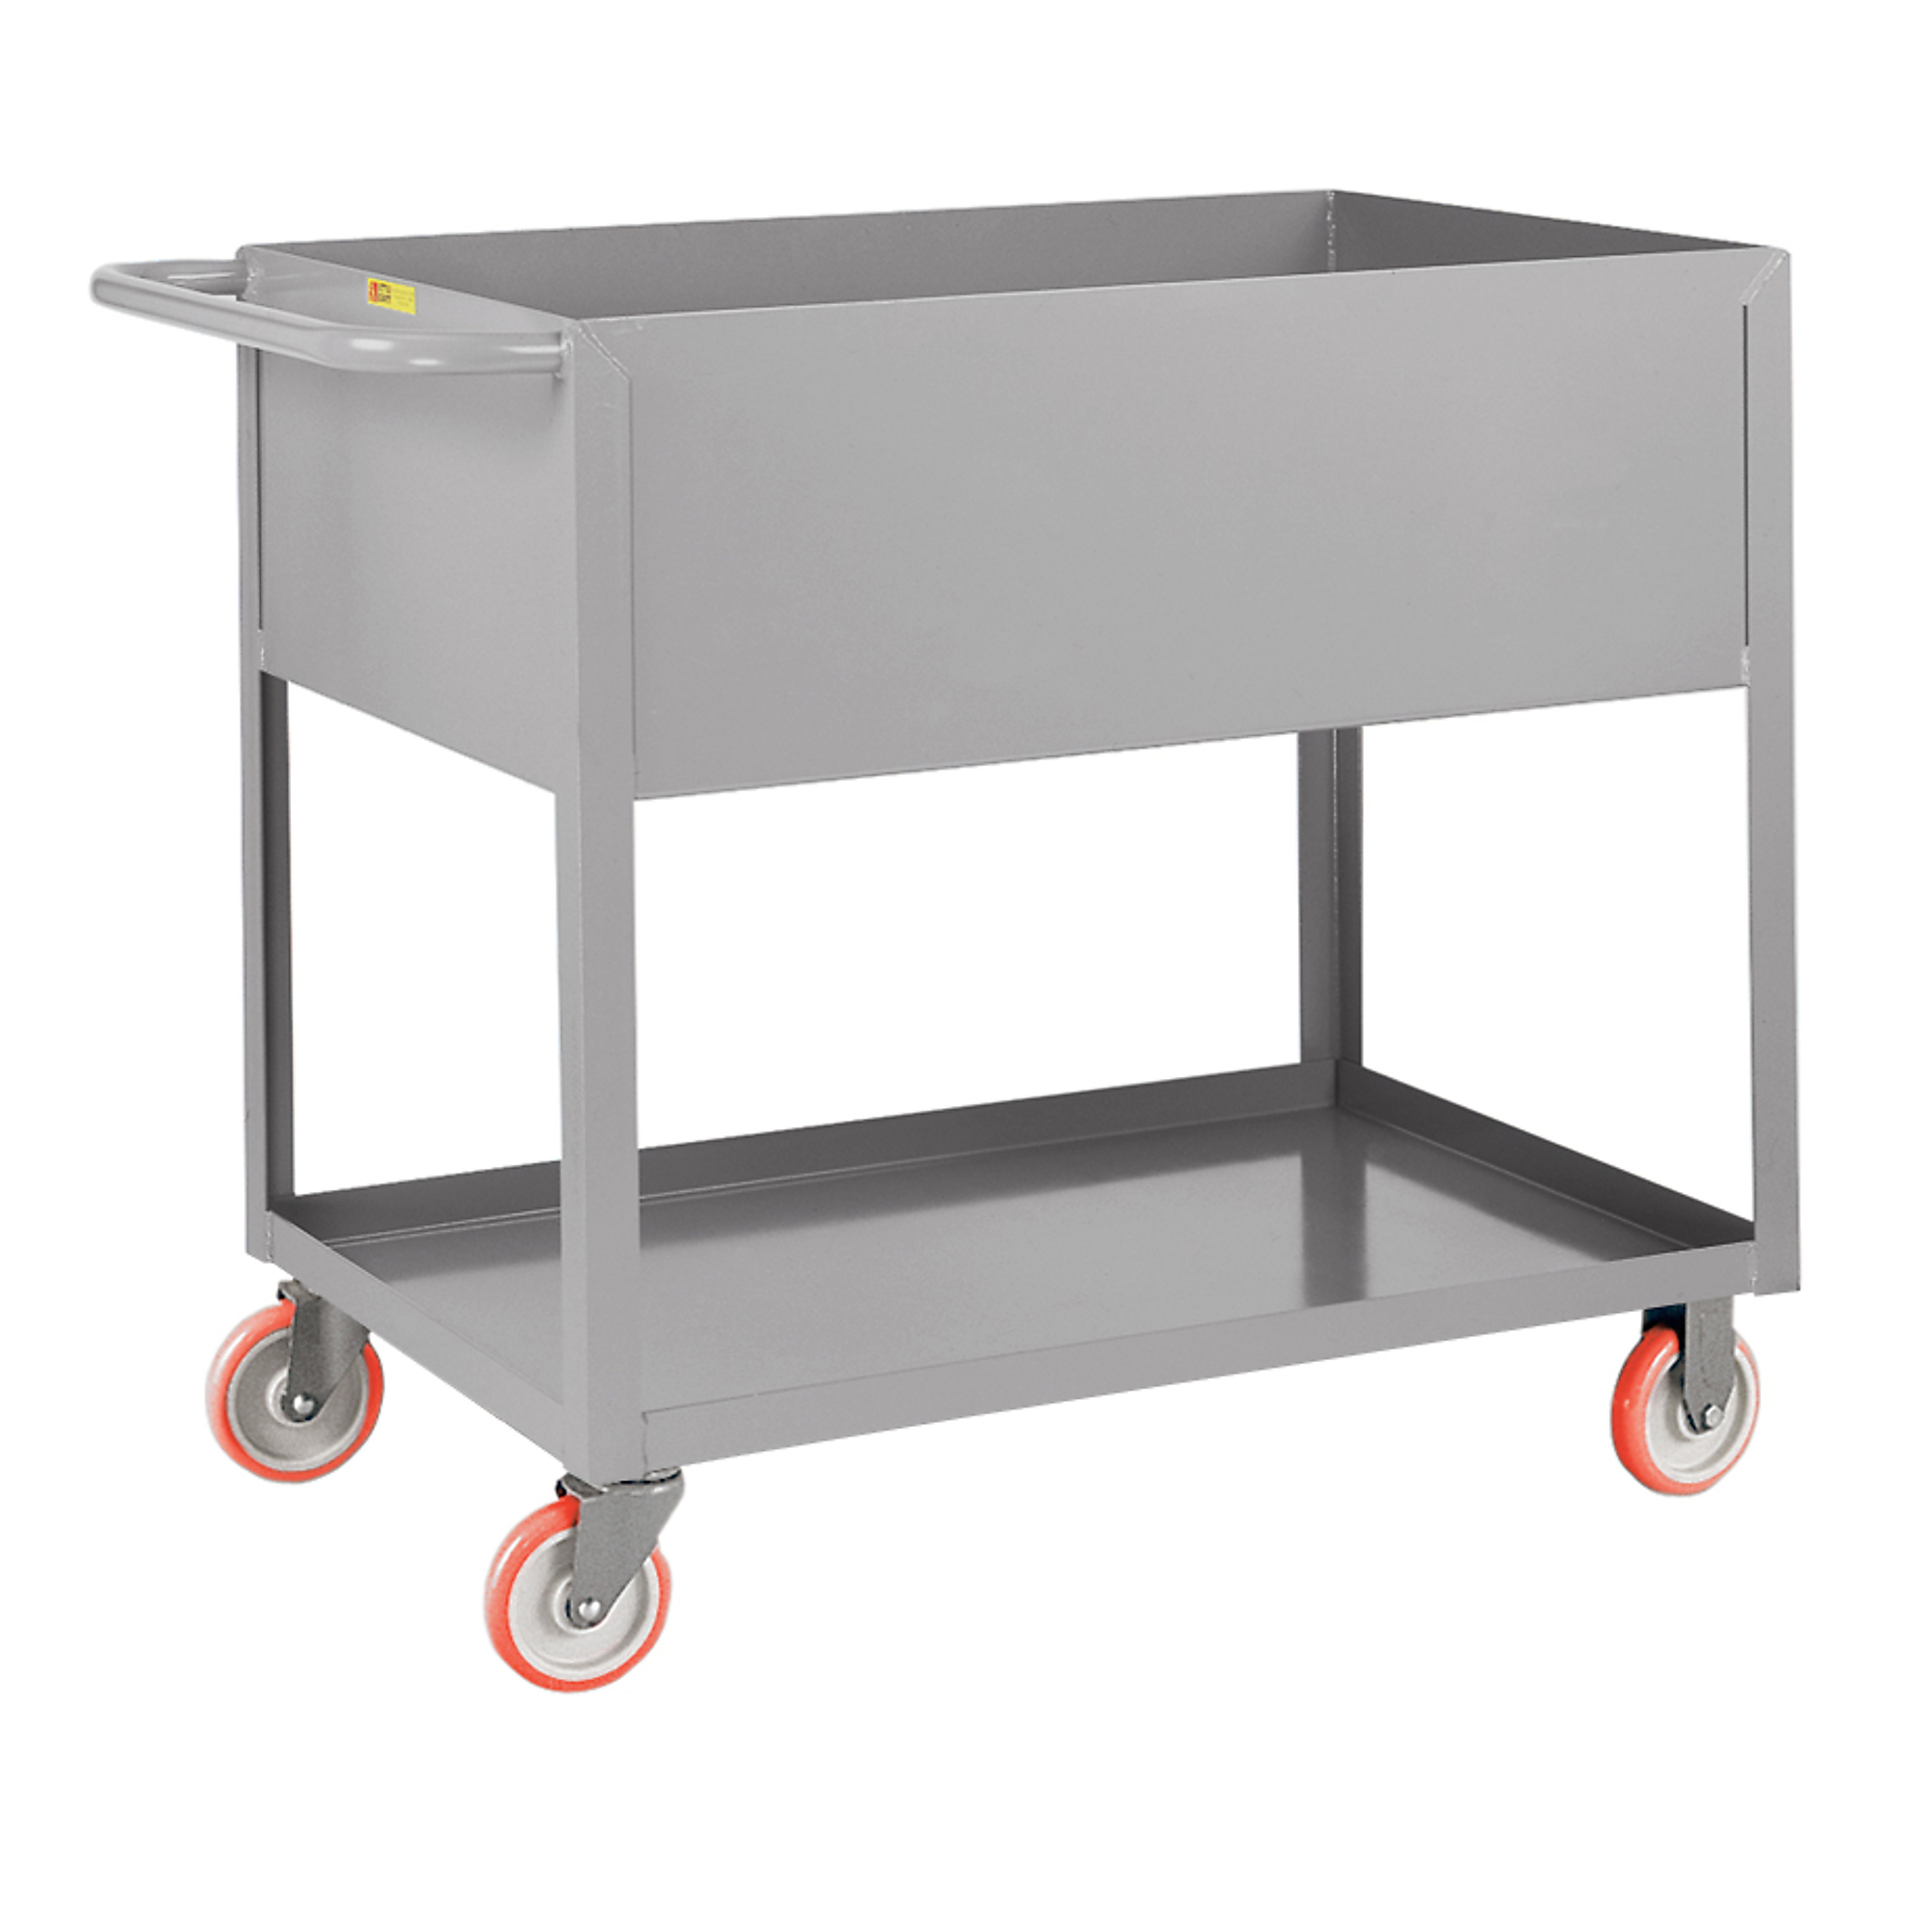 Little Giant, 12Inch Deep Shelf Truck, 24x36, 1200 lbs, Total Capacity 1200 lb, Shelves (qty.) 2, Material Carbon Steel, Model DS2436X12-5PY